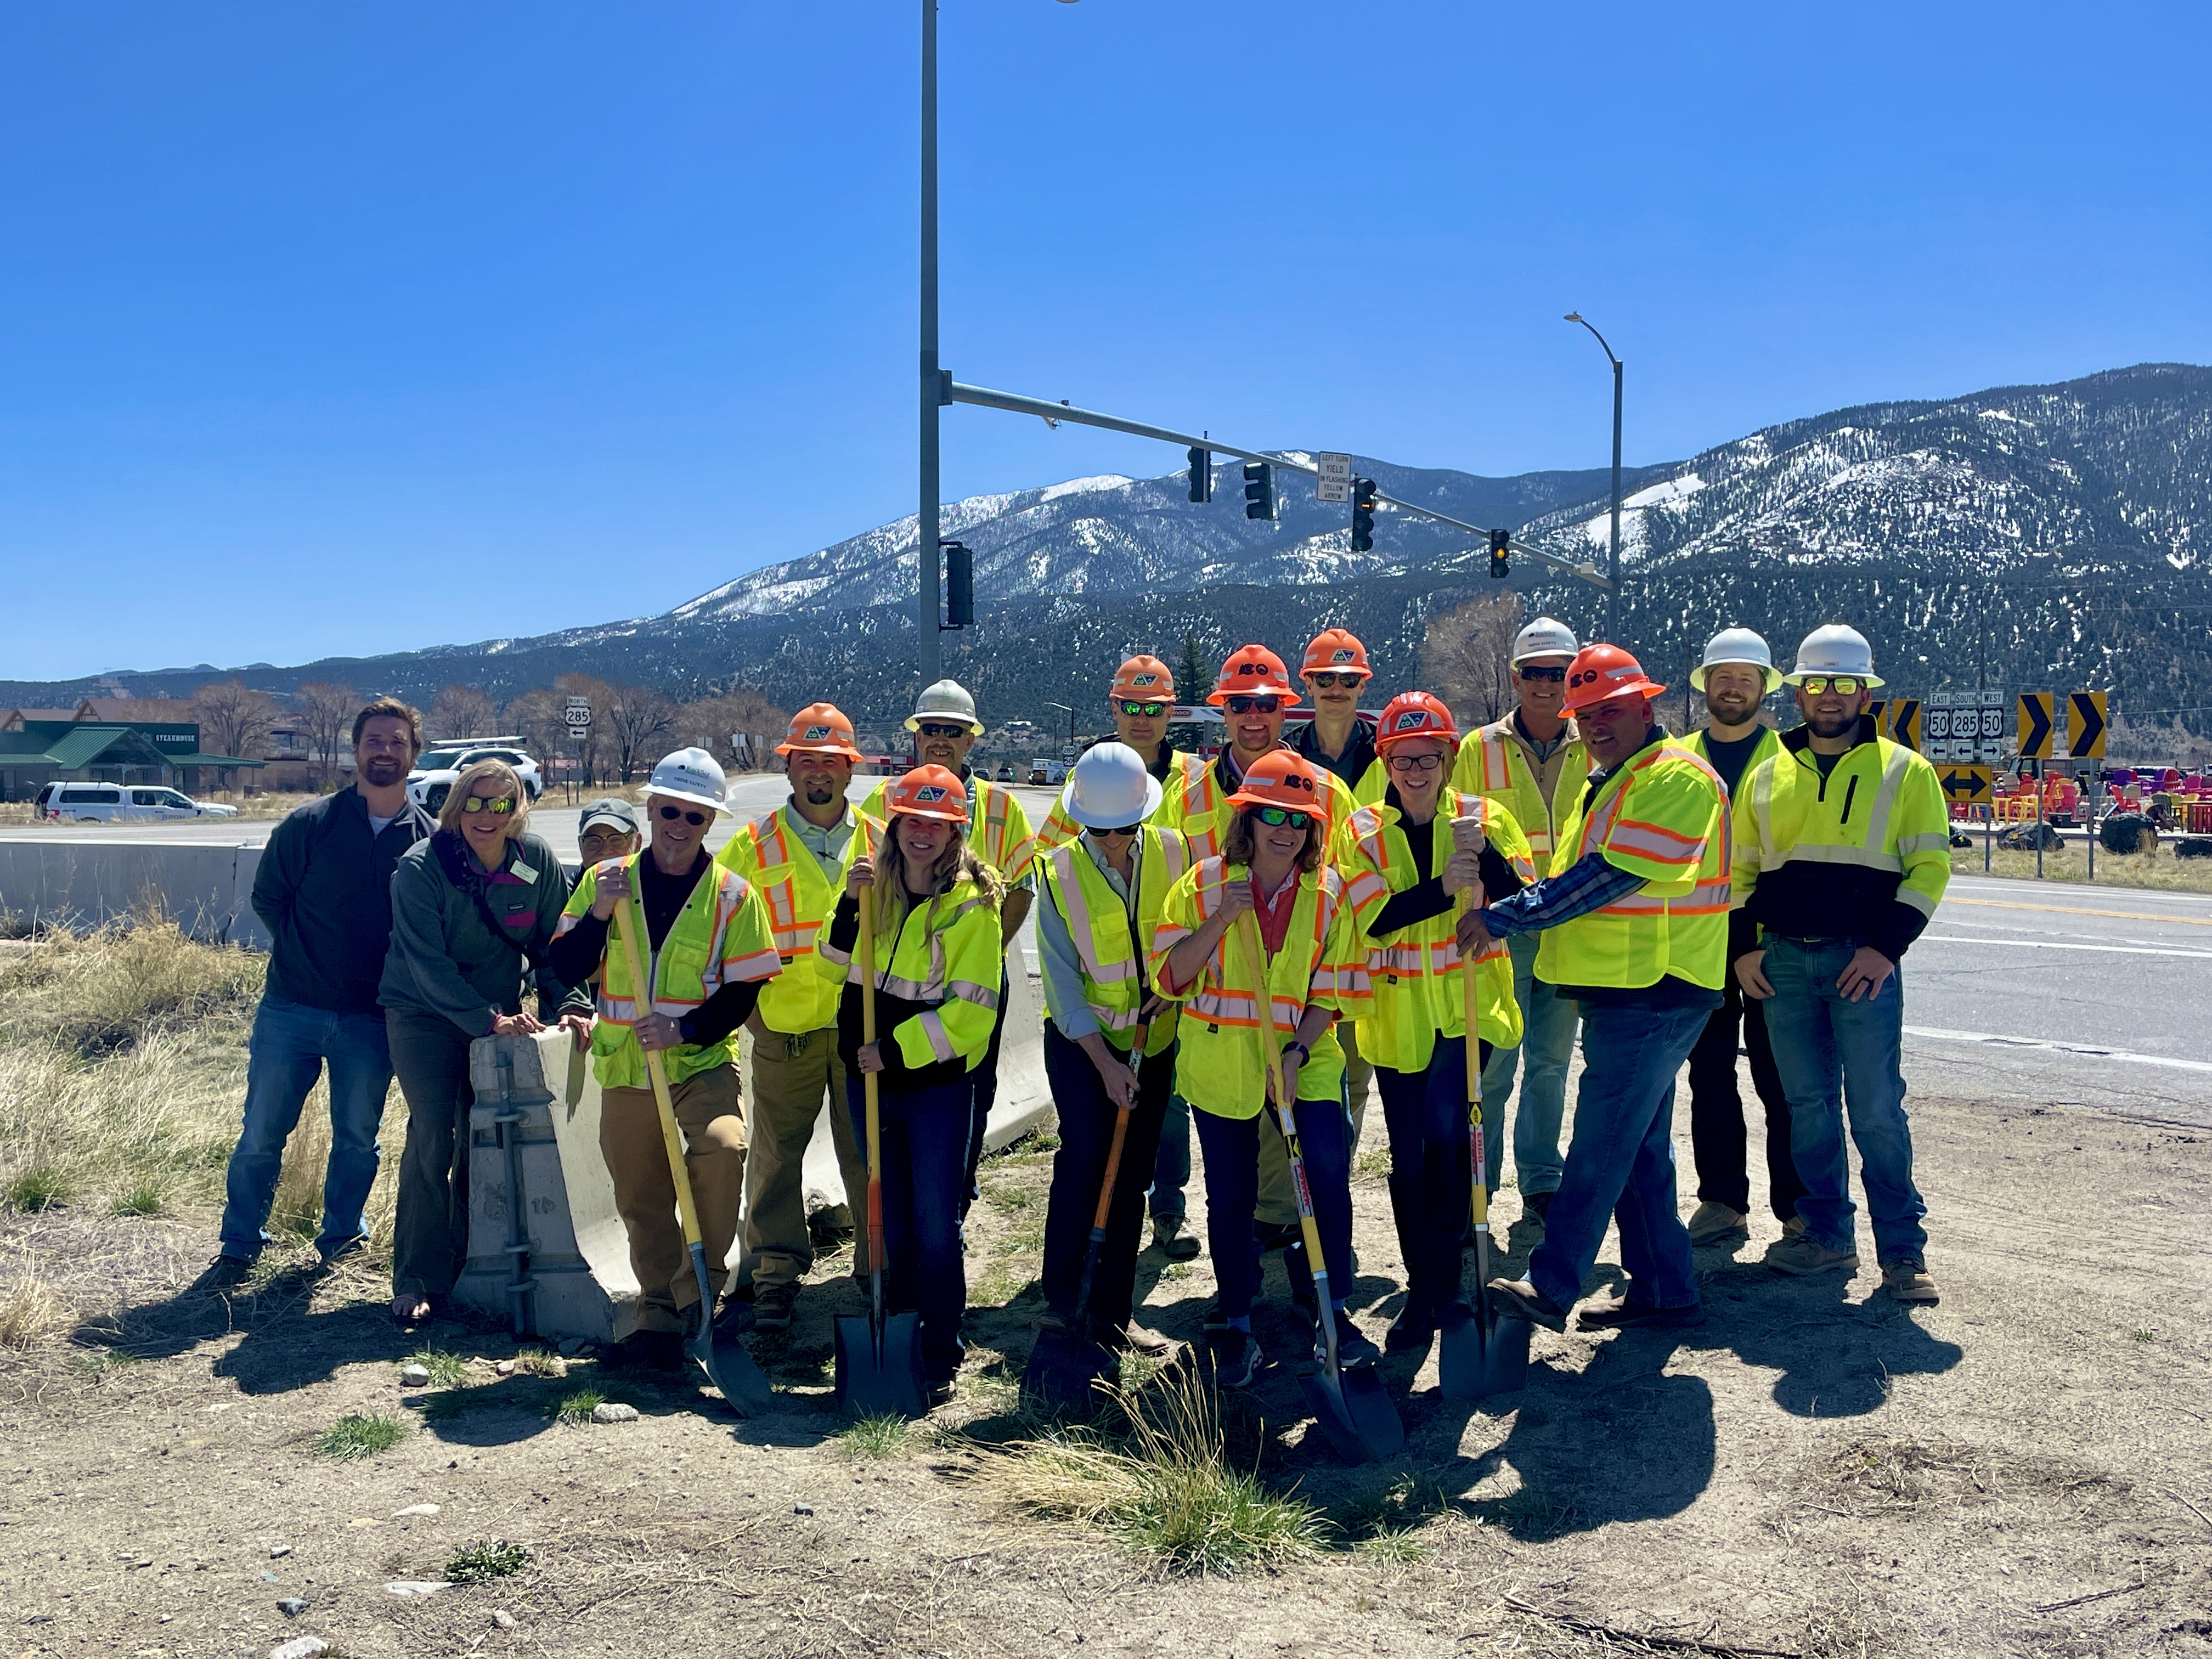 On April 12, CDOT, local town officials and contracting partners broke ground on the US 285 and US 50 Intersection and Surface Improvements Project in Poncha Springs detail image